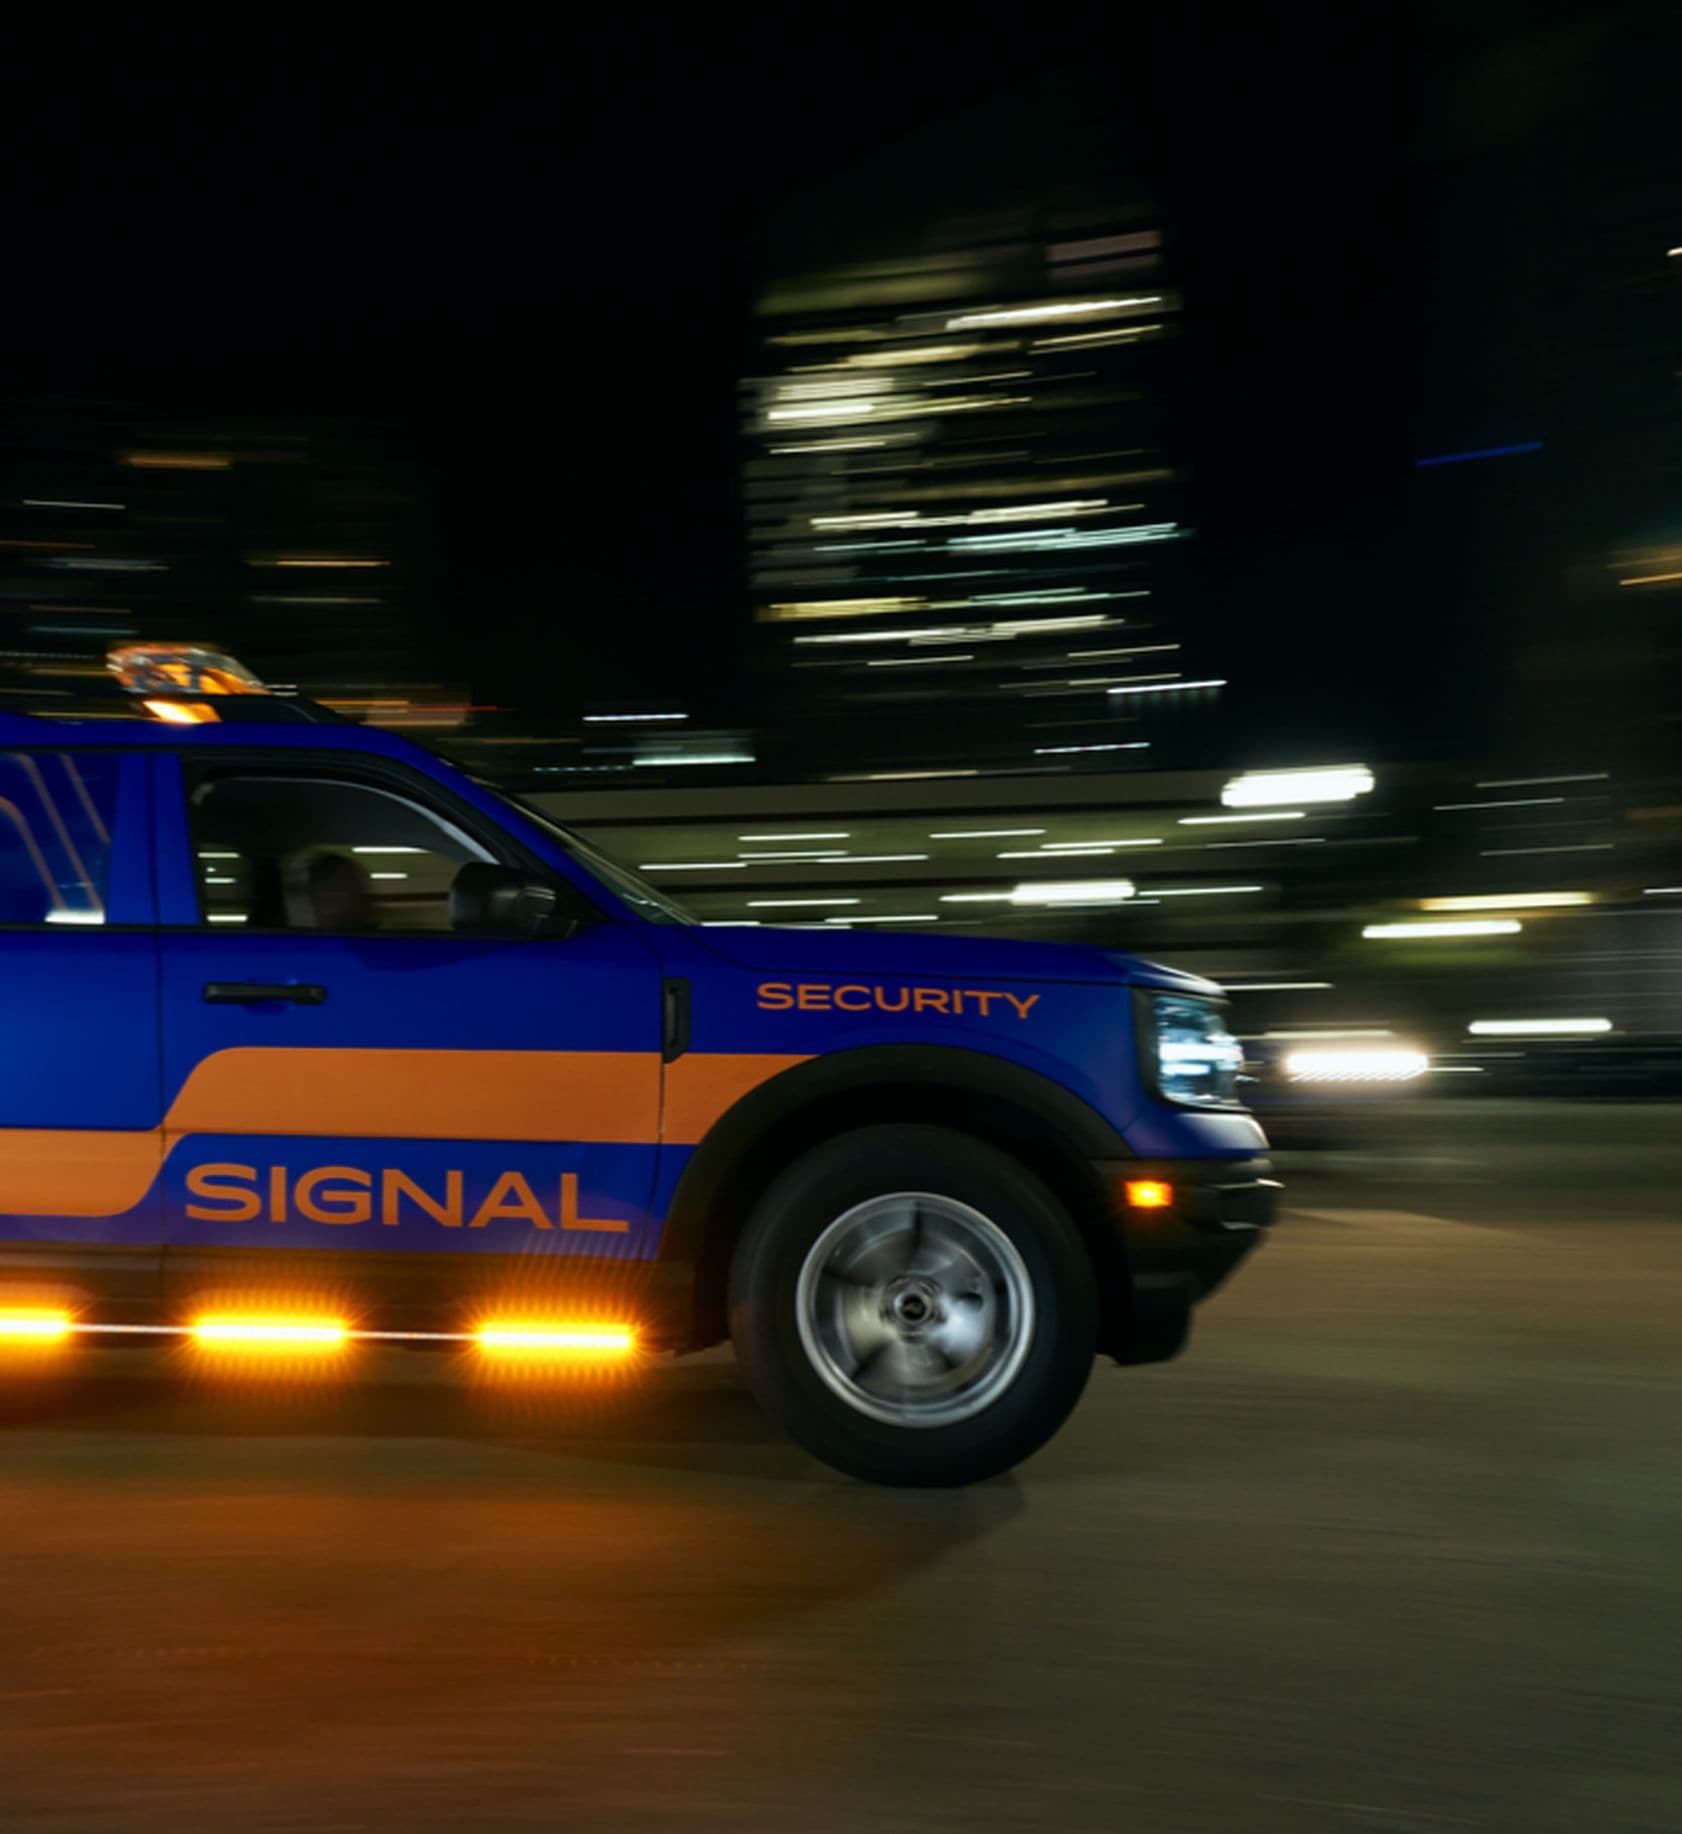 Signal mobile patrol security vehicle driving at night